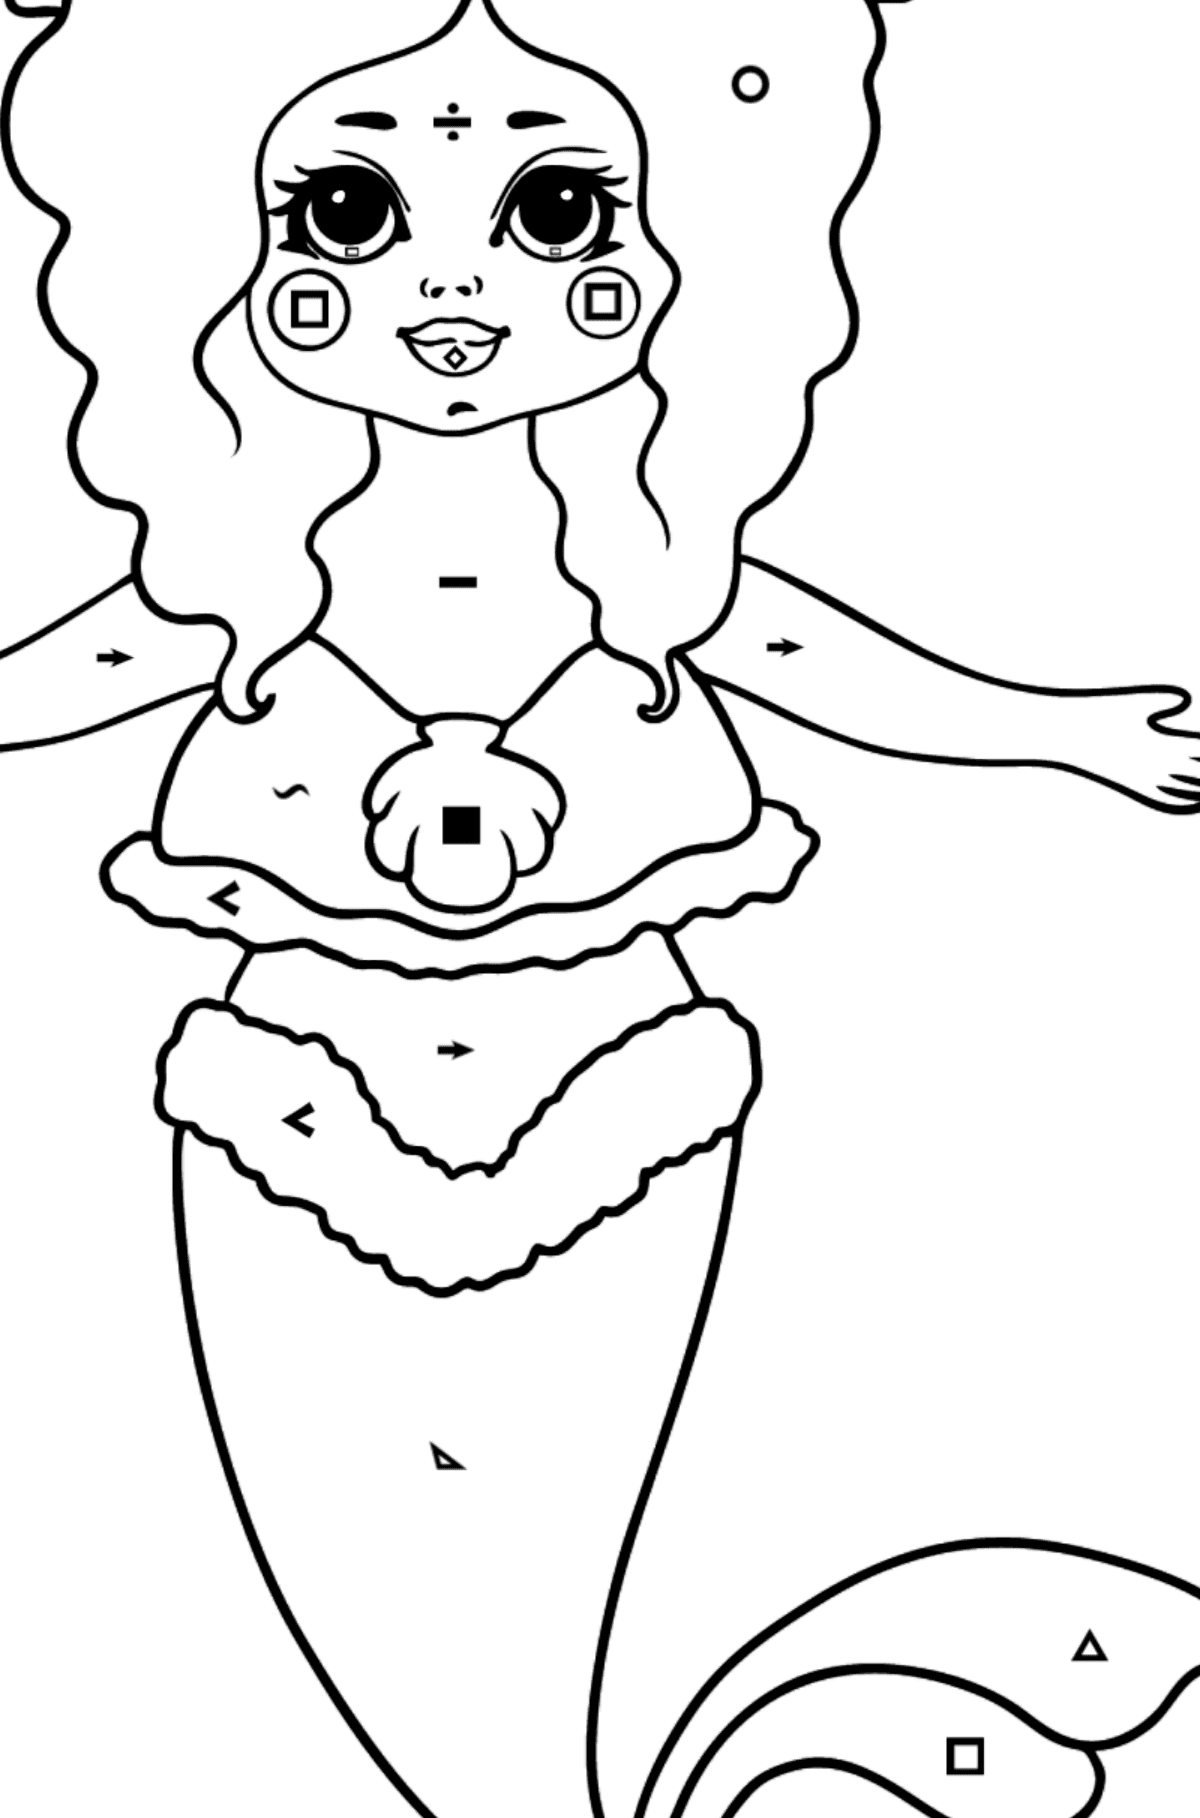 Mermaid with Yellow Tail coloring page - Coloring by Symbols and Geometric Shapes for Kids